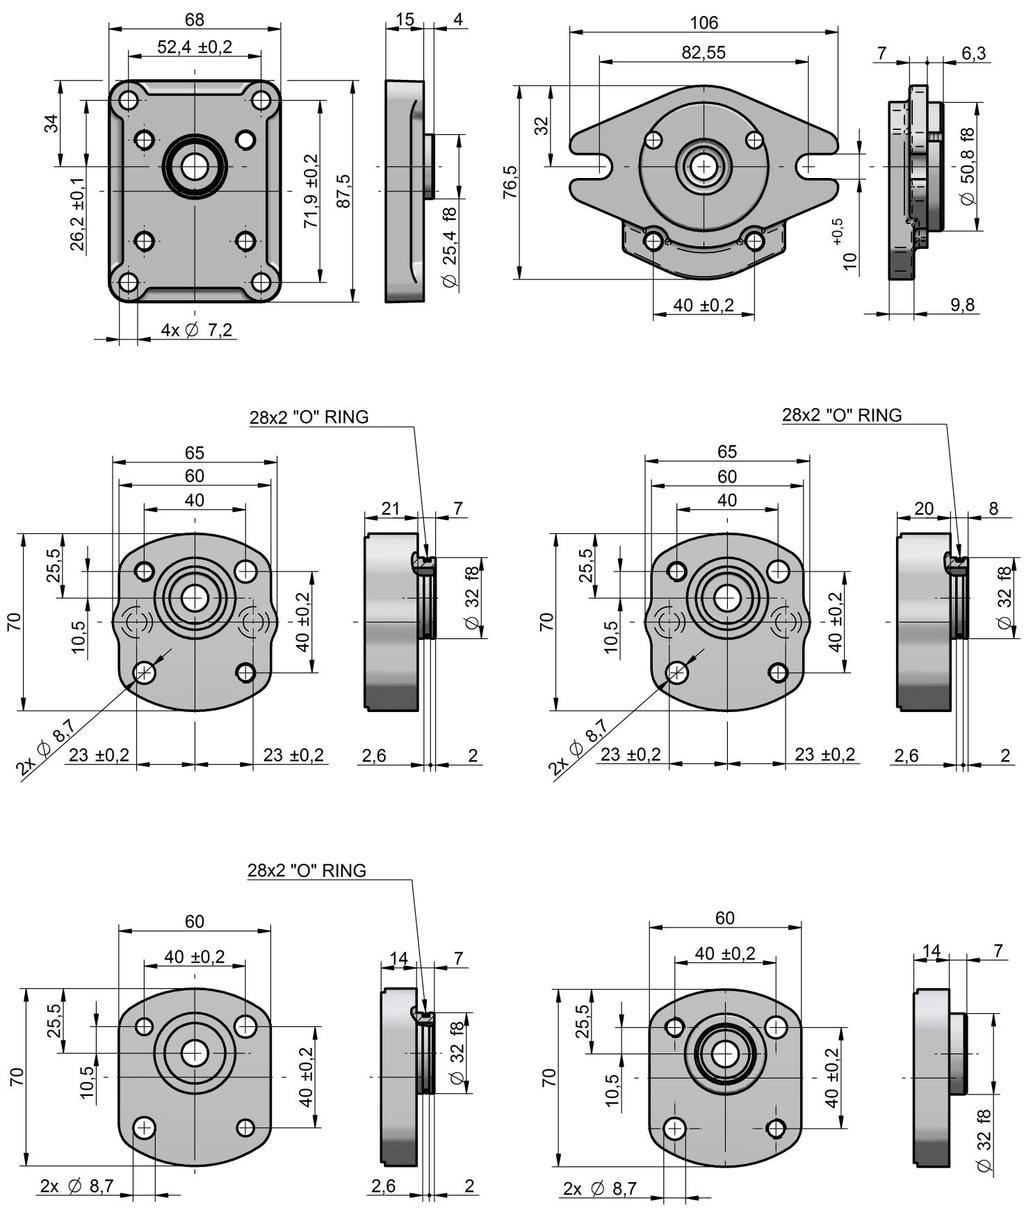 P23 Design of Flange, Drive Shaft and Inlets and